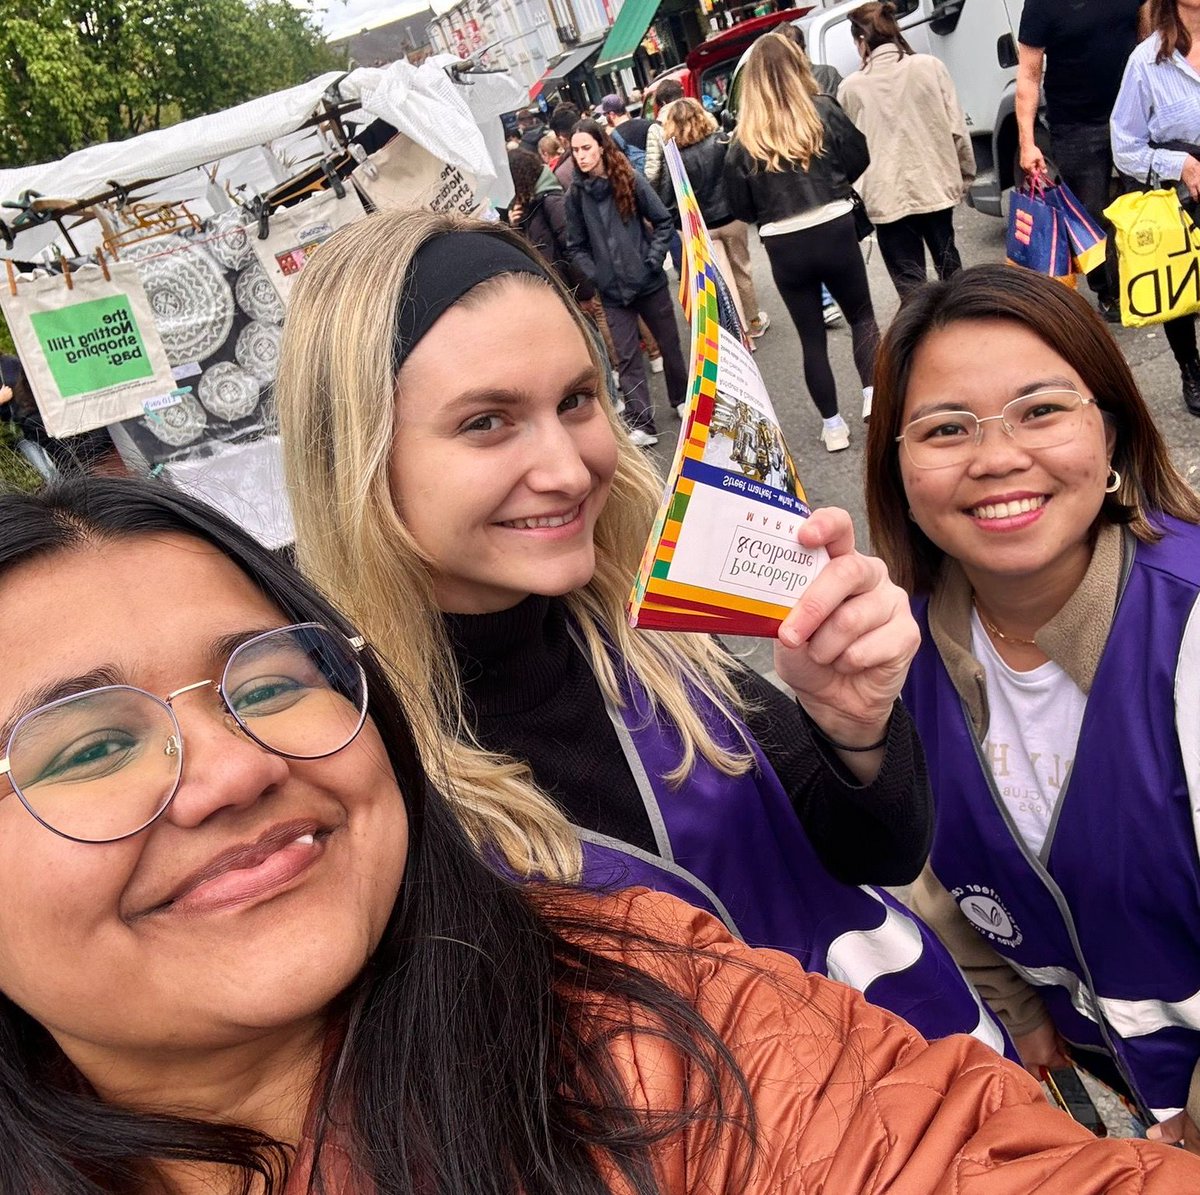 Grateful for these smiles, lighting up @VisitPortobello Market each Saturday 😄 🙌 If you are also looking for a fun and flexible #volunteering opportunity , come join our #Volunteer Market Ambassadors as they meet and greet market visitors! Sign up: buff.ly/3Q6bNN7🌞